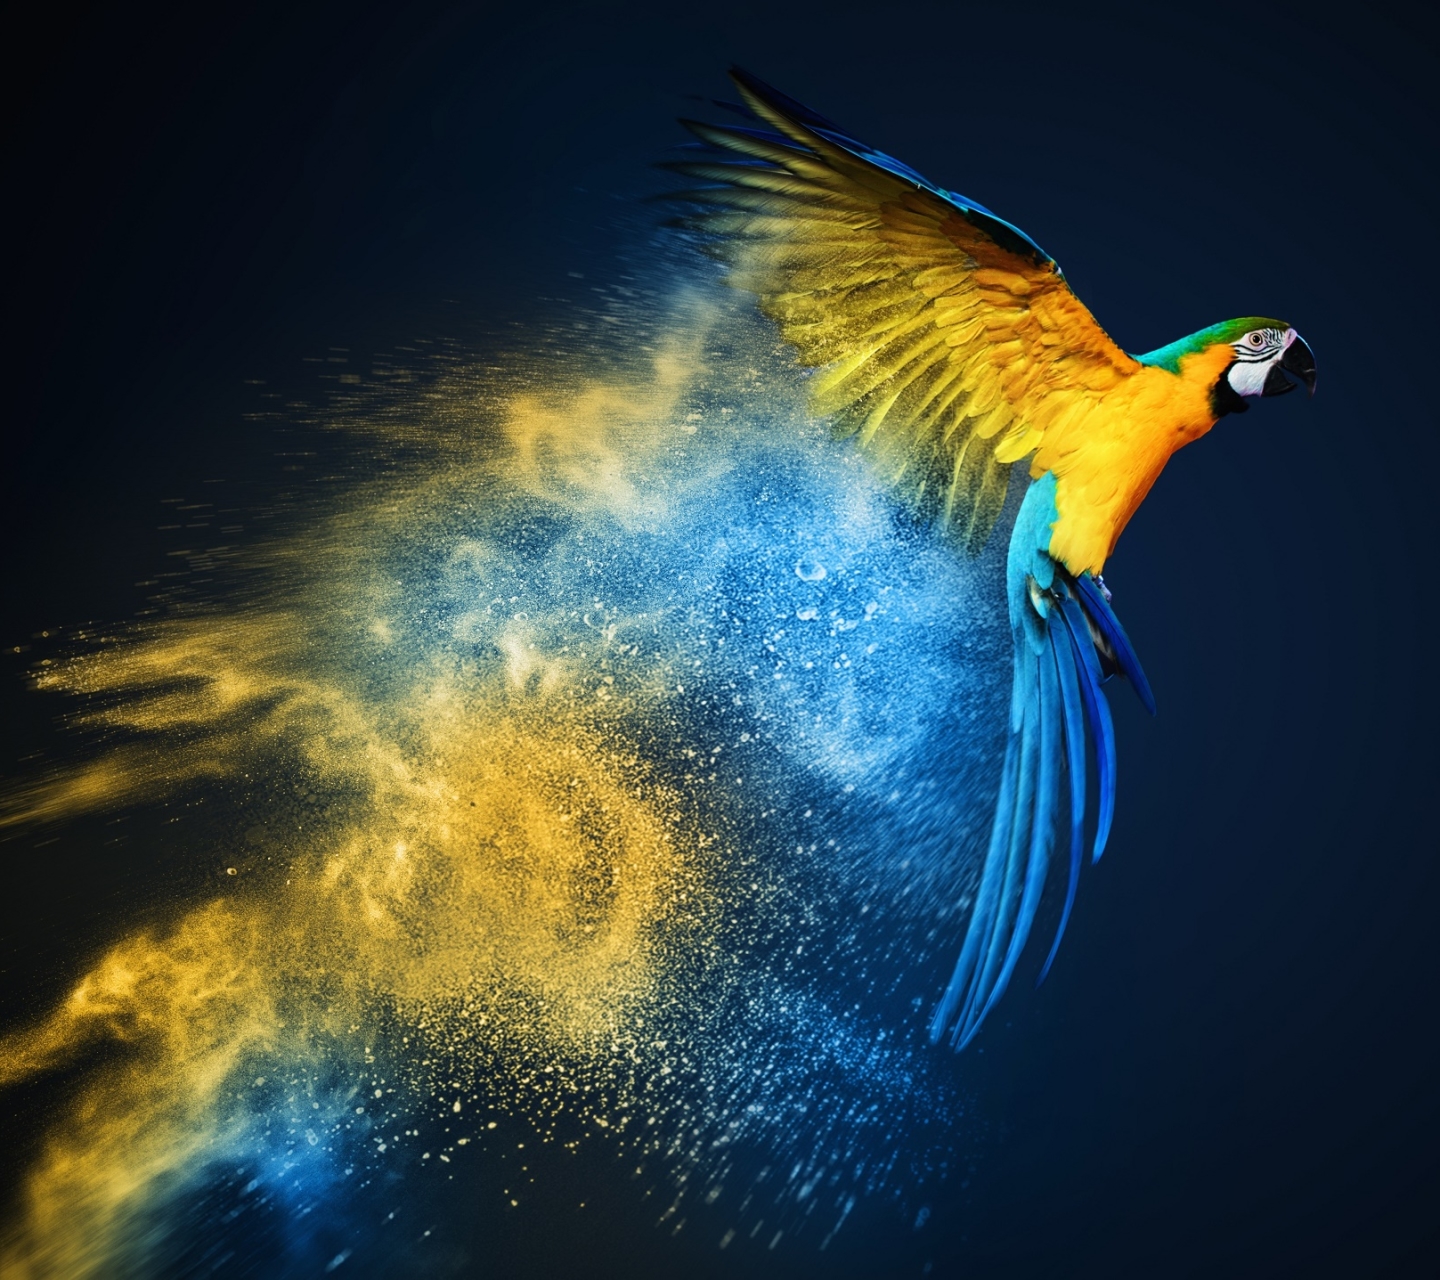 Free download wallpaper Birds, Bird, Animal, Macaw, Parrot, Blue And Yellow Macaw on your PC desktop